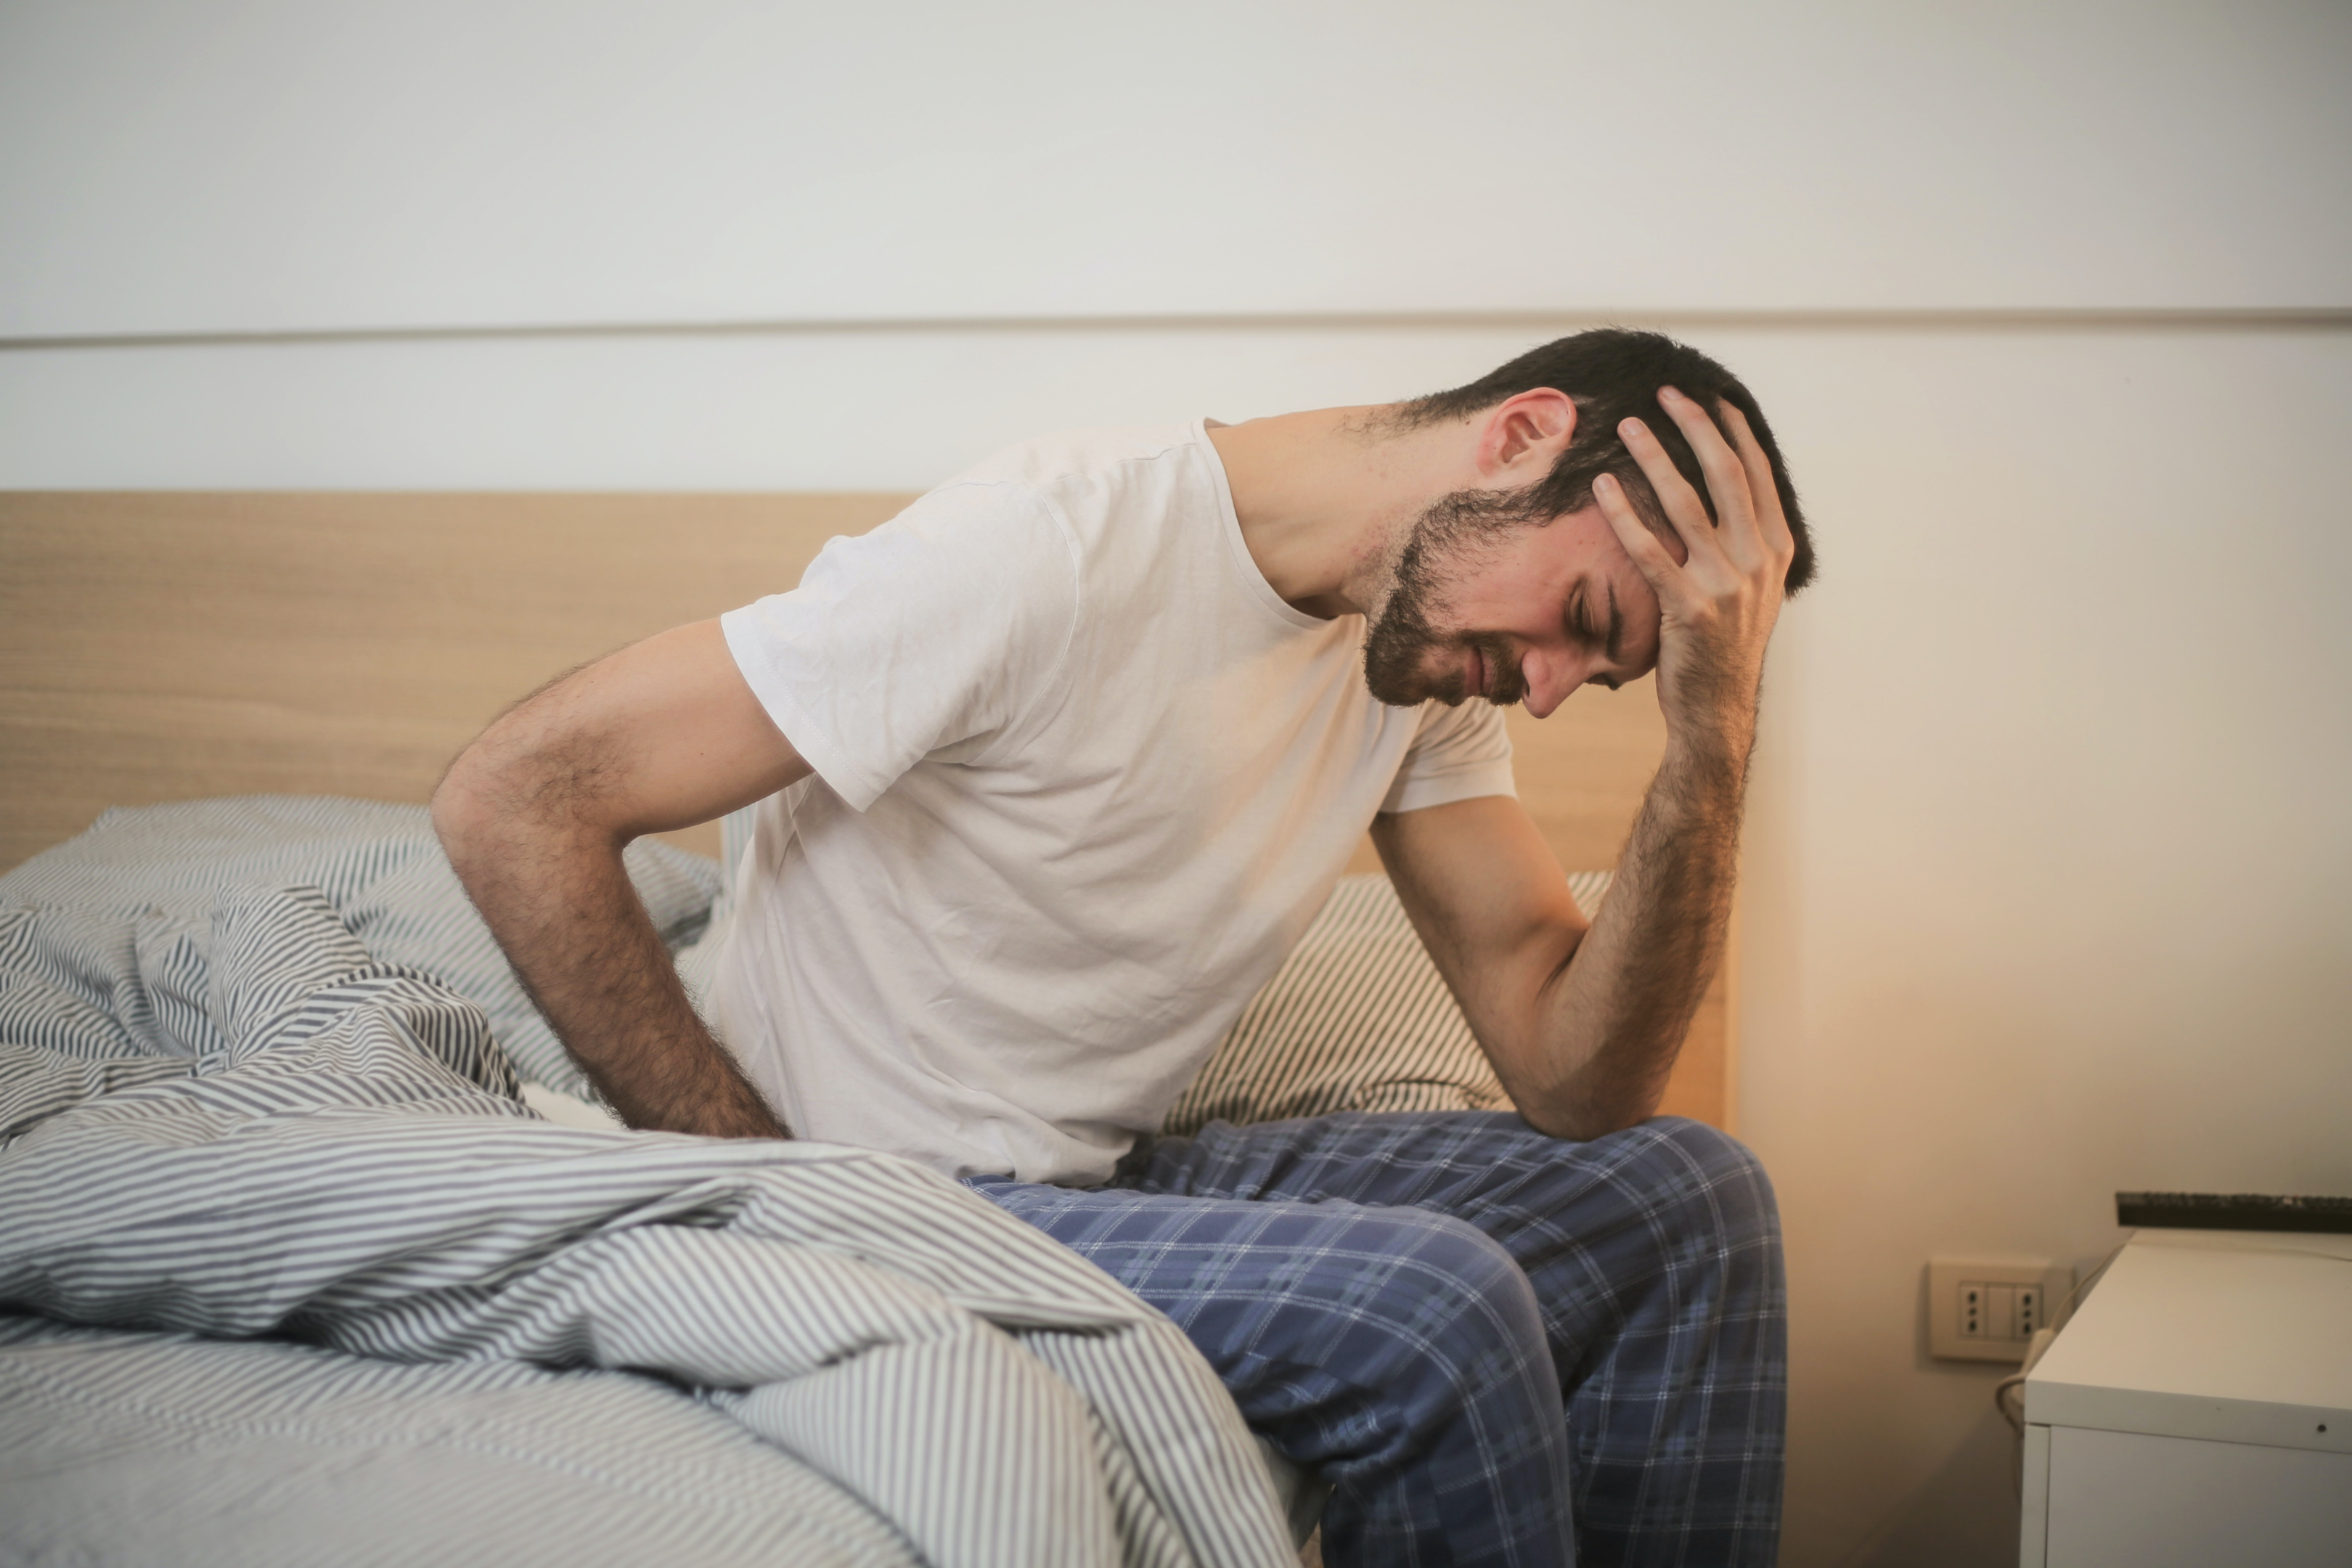 Photo by Andrea Piacquadio: https://www.pexels.com/photo/young-man-in-sleepwear-suffering-from-headache-in-morning-3771115/